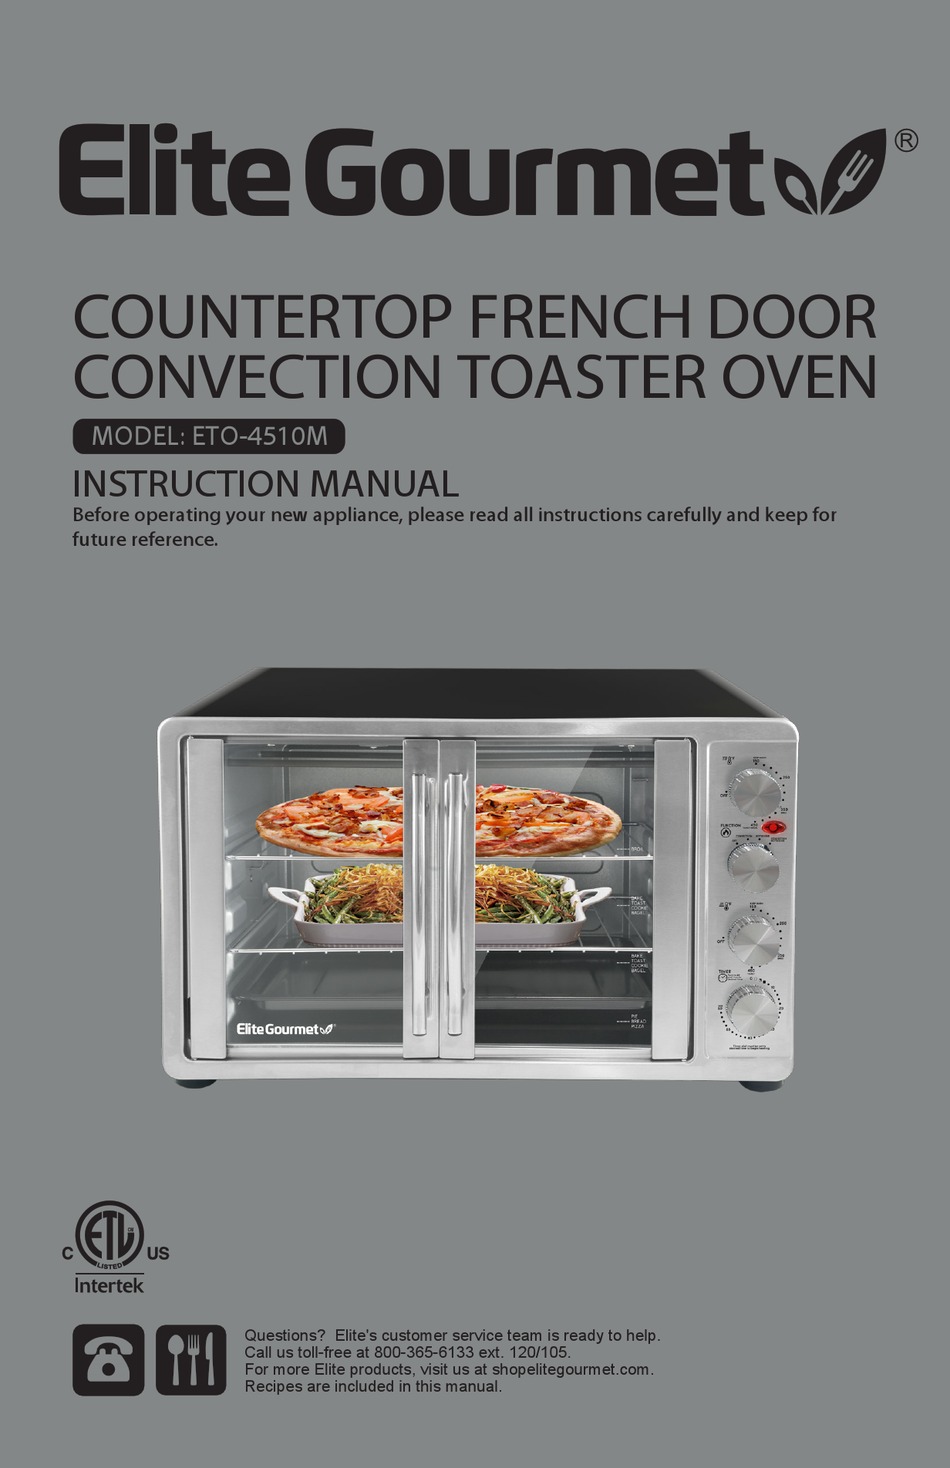 Elite Gourmet French Door Toaster Oven Cookbook 2021: 800-Day Simple Savory Oven Recipes to Bake, Broil, Toast for Smart People On a Budget - Anyone Can Cook! [Book]